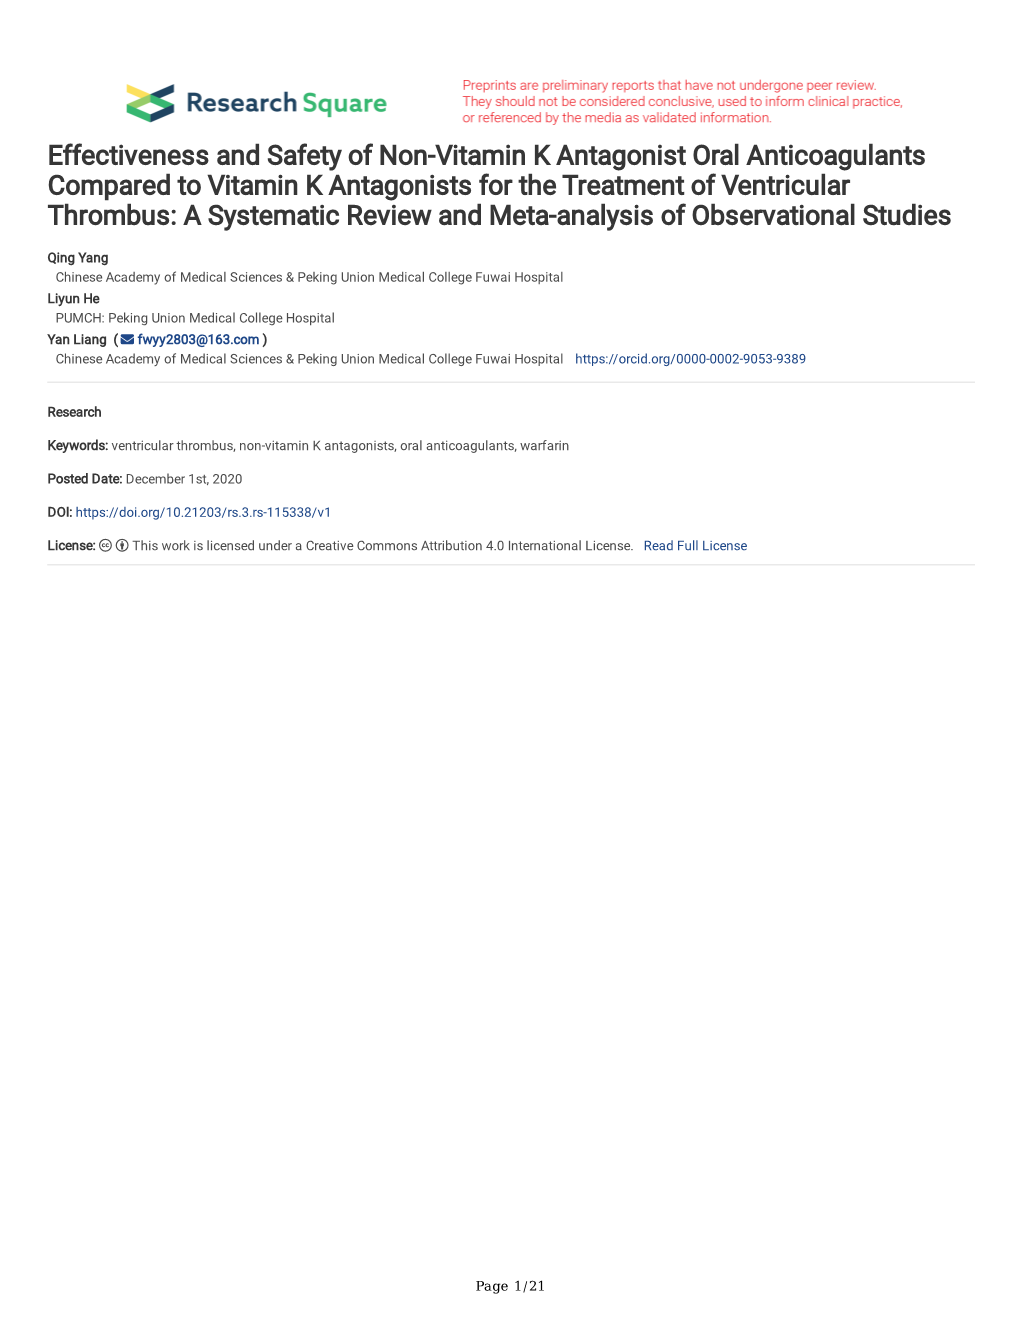 Effectiveness and Safety of Non-Vitamin K Antagonist Oral